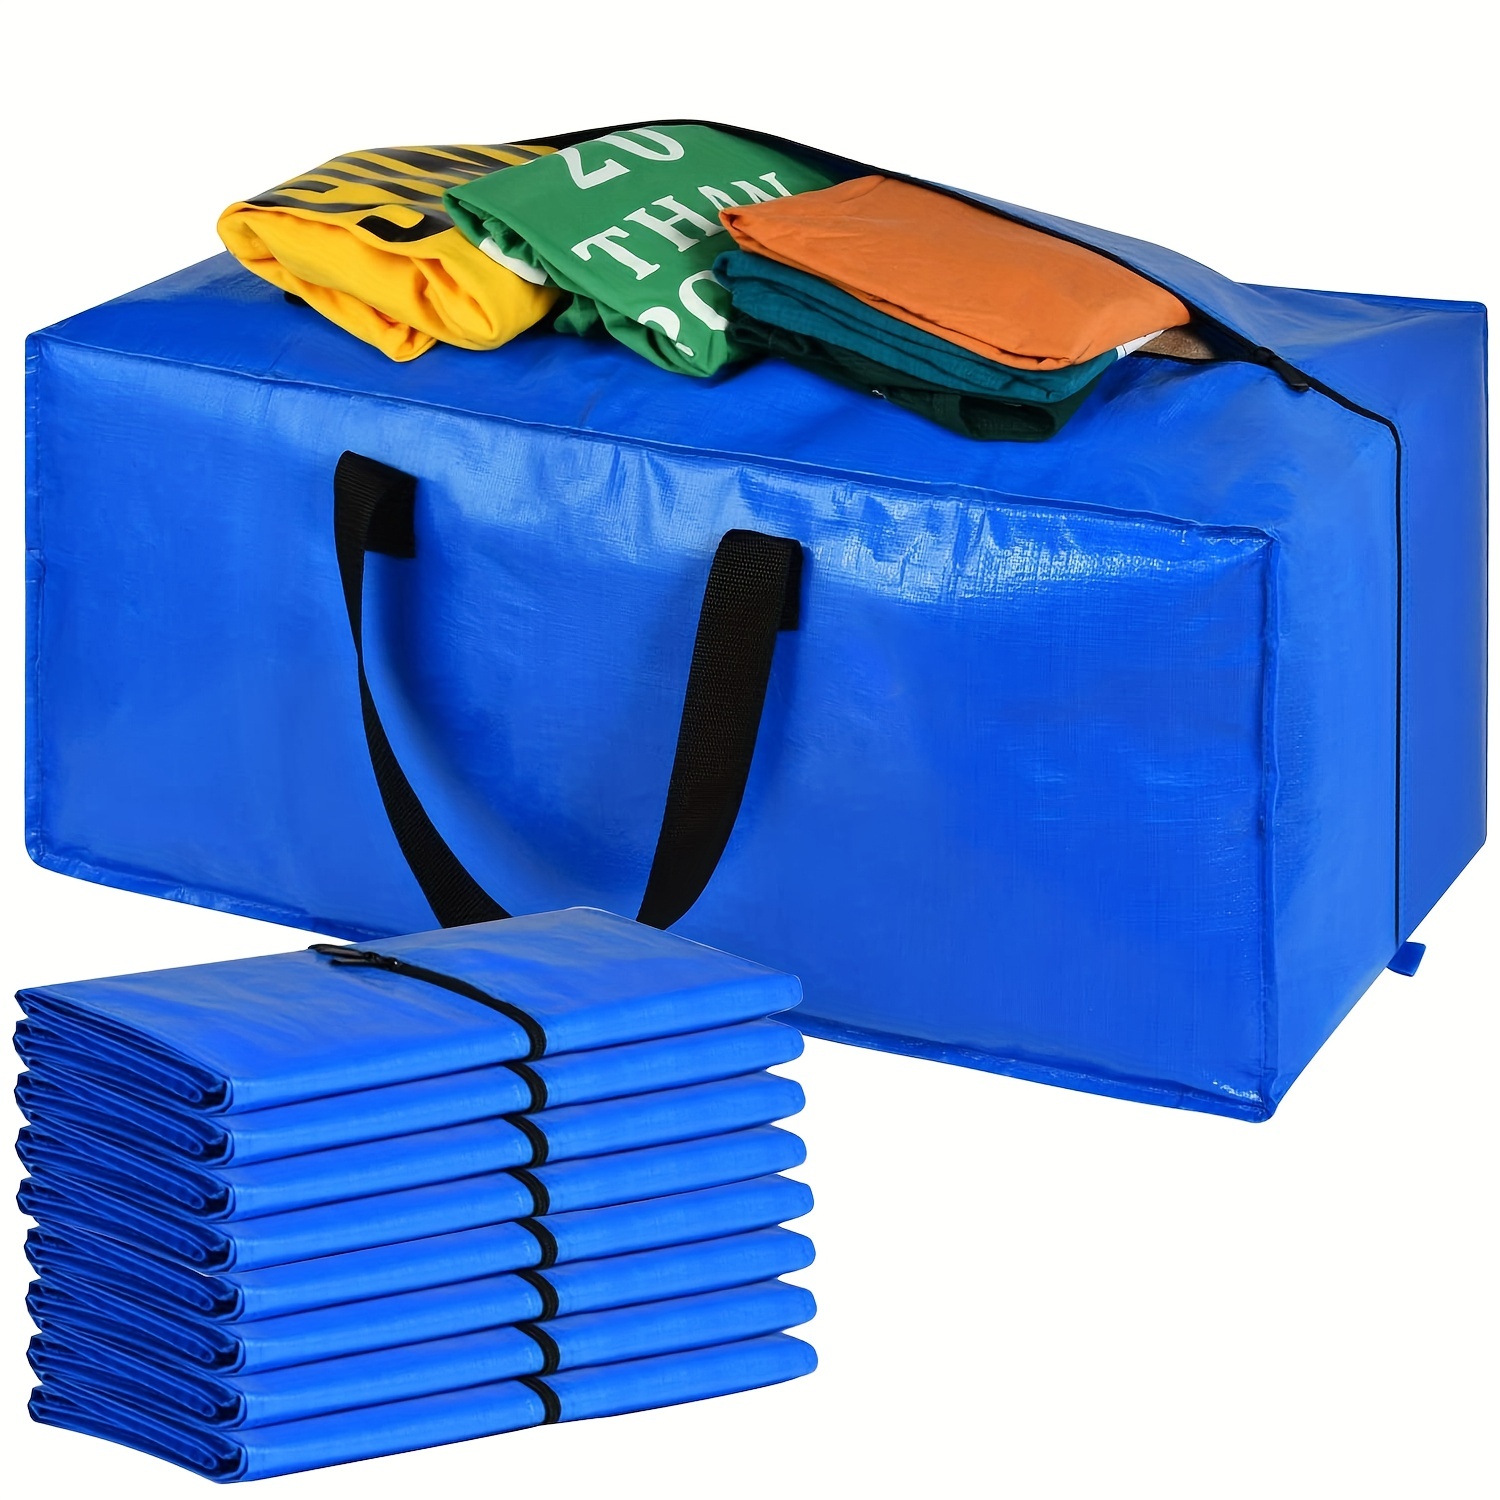 Heavy Duty Extra Large Moving Bags W/ Backpack Straps Strong Handles   Zippers, Pe Fabric Storage Totes For Space Saving, Fold Flat, Alternative  To Moving Box, Made Of Recycled Material, Blue Color